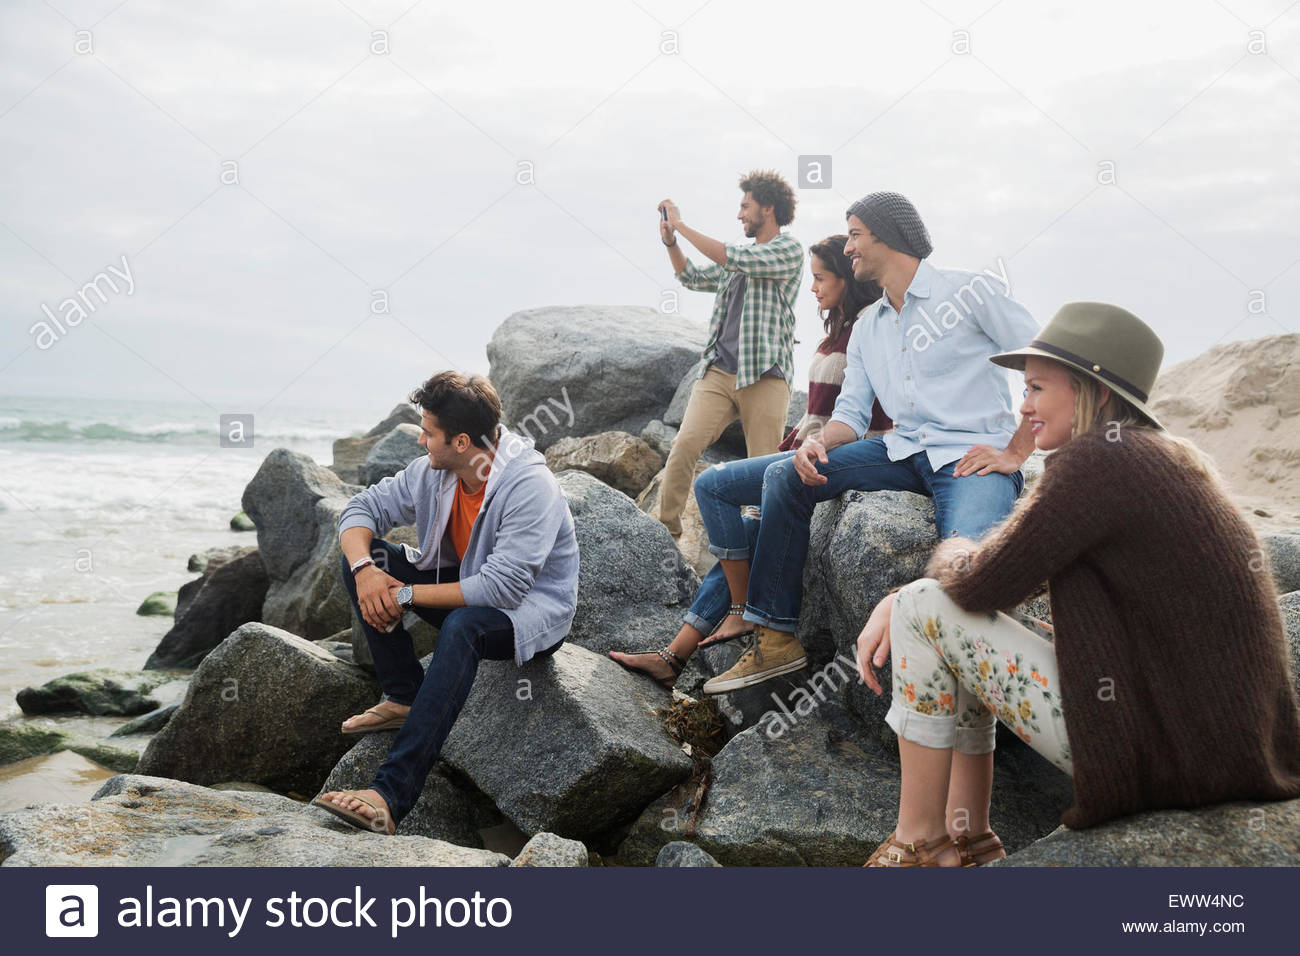 Friends hanging out on beach rocks Stock Photo